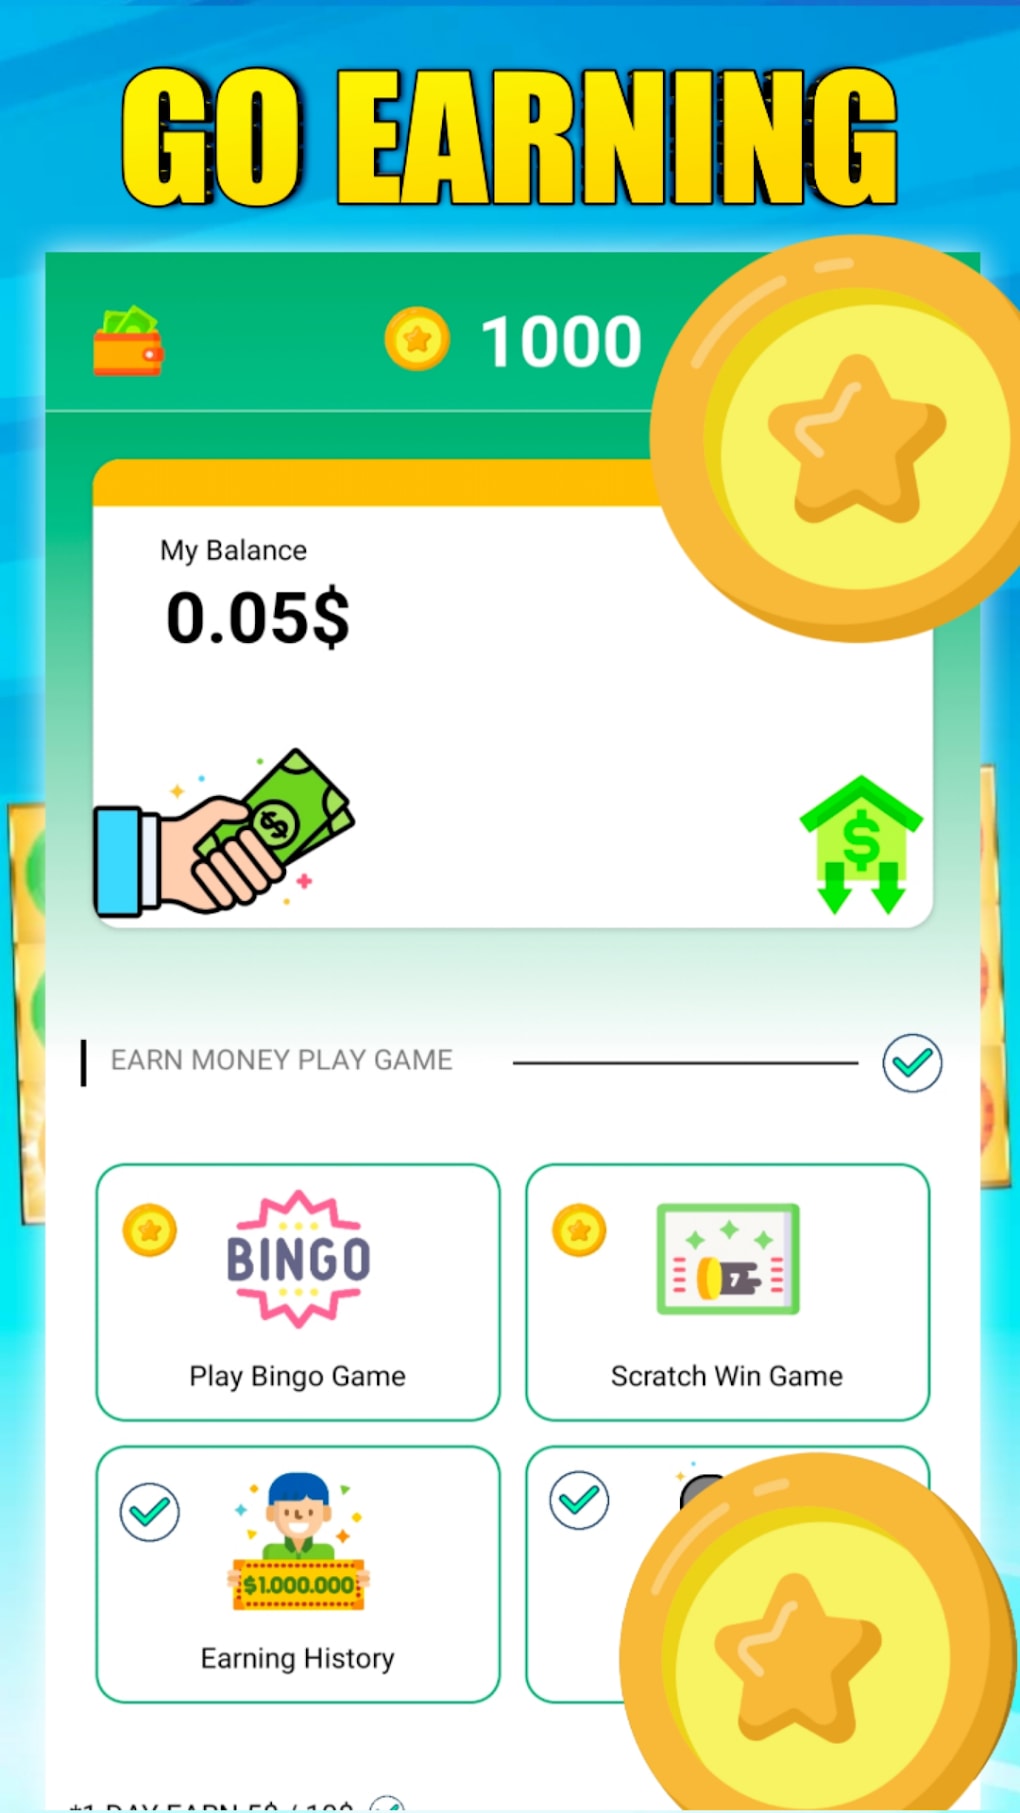 Online Games - How to earn money with online games apk?